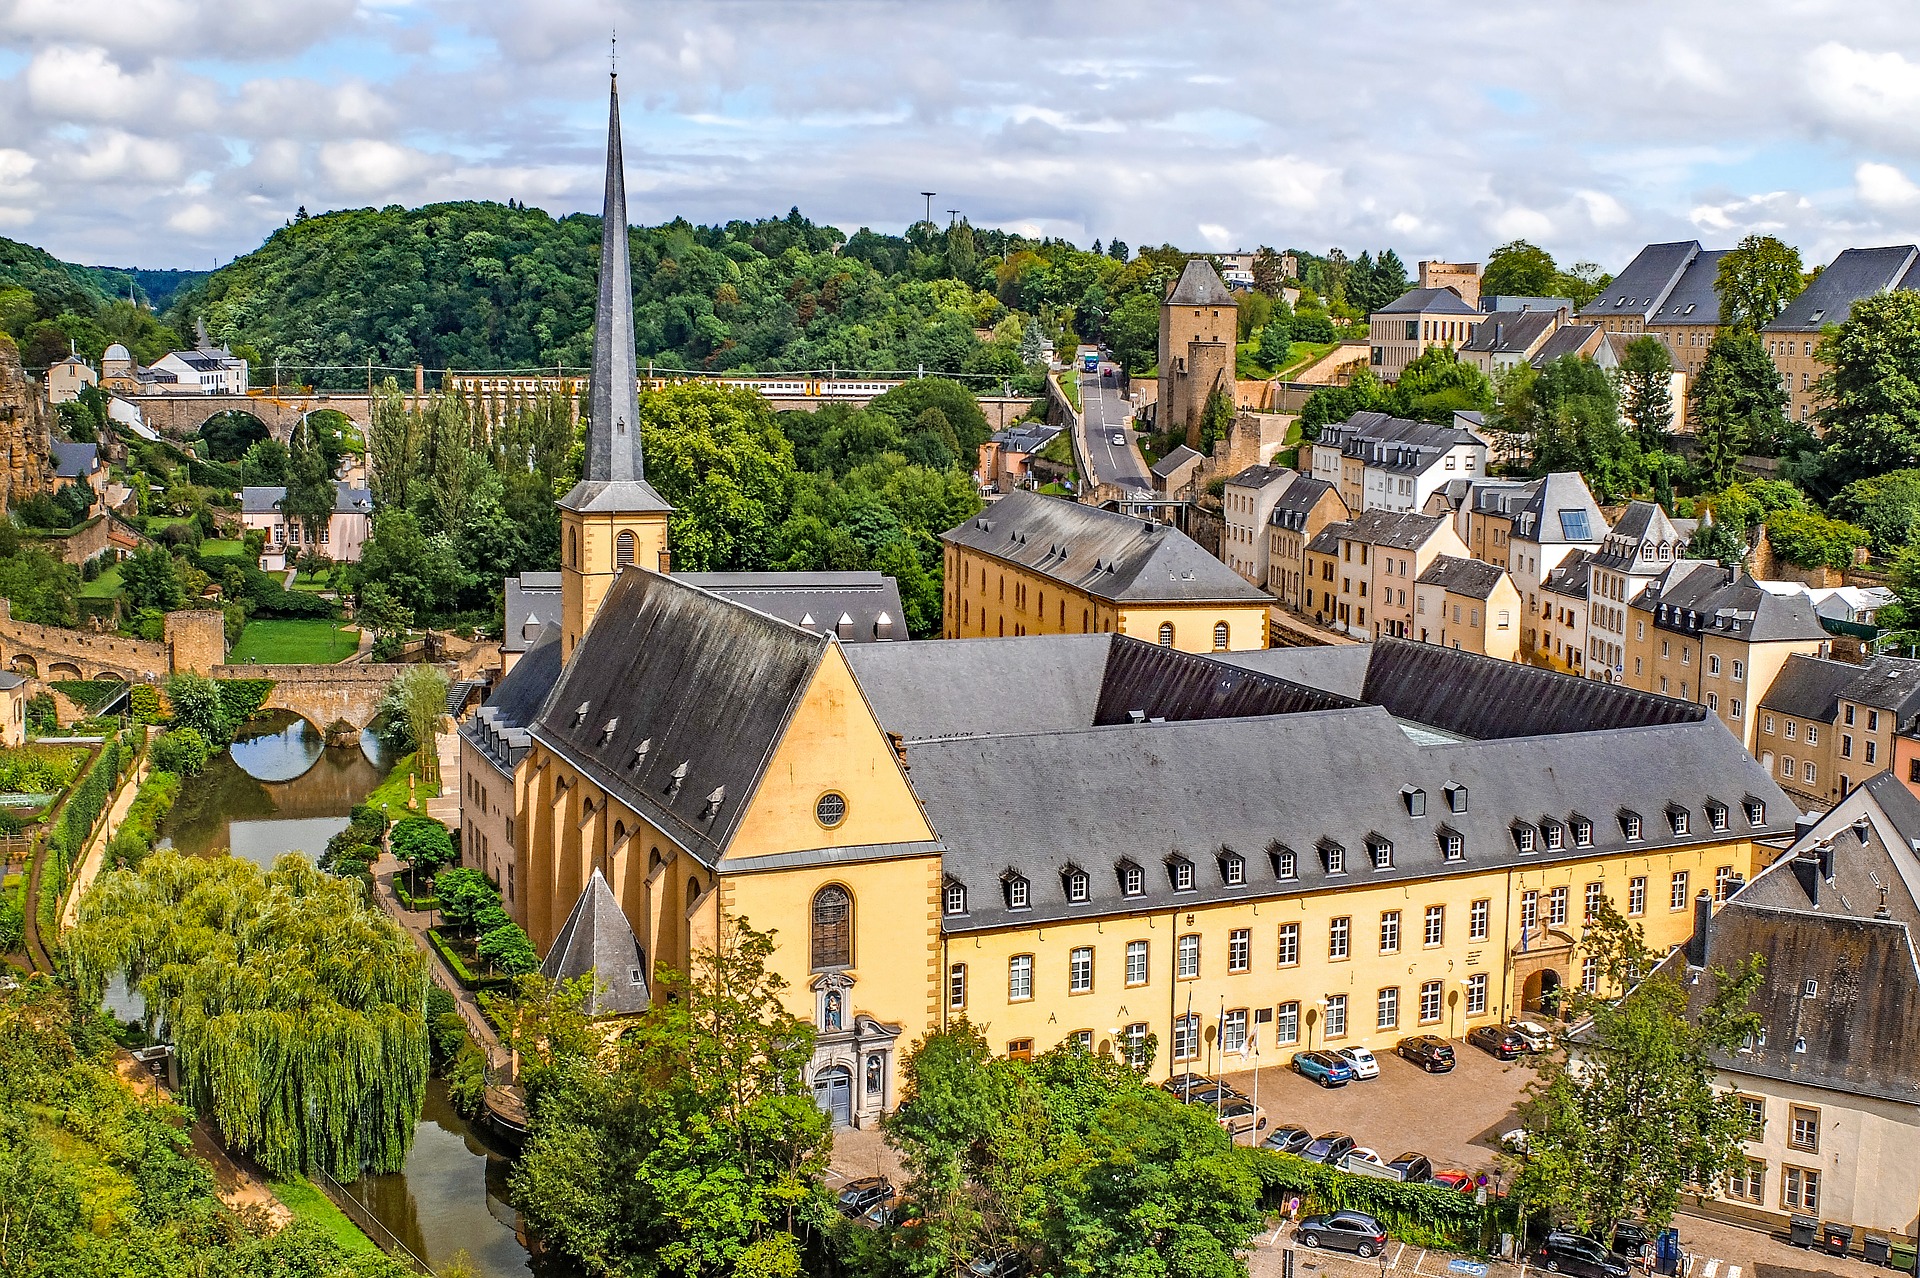 Private detectives and investigators in Luxembourg